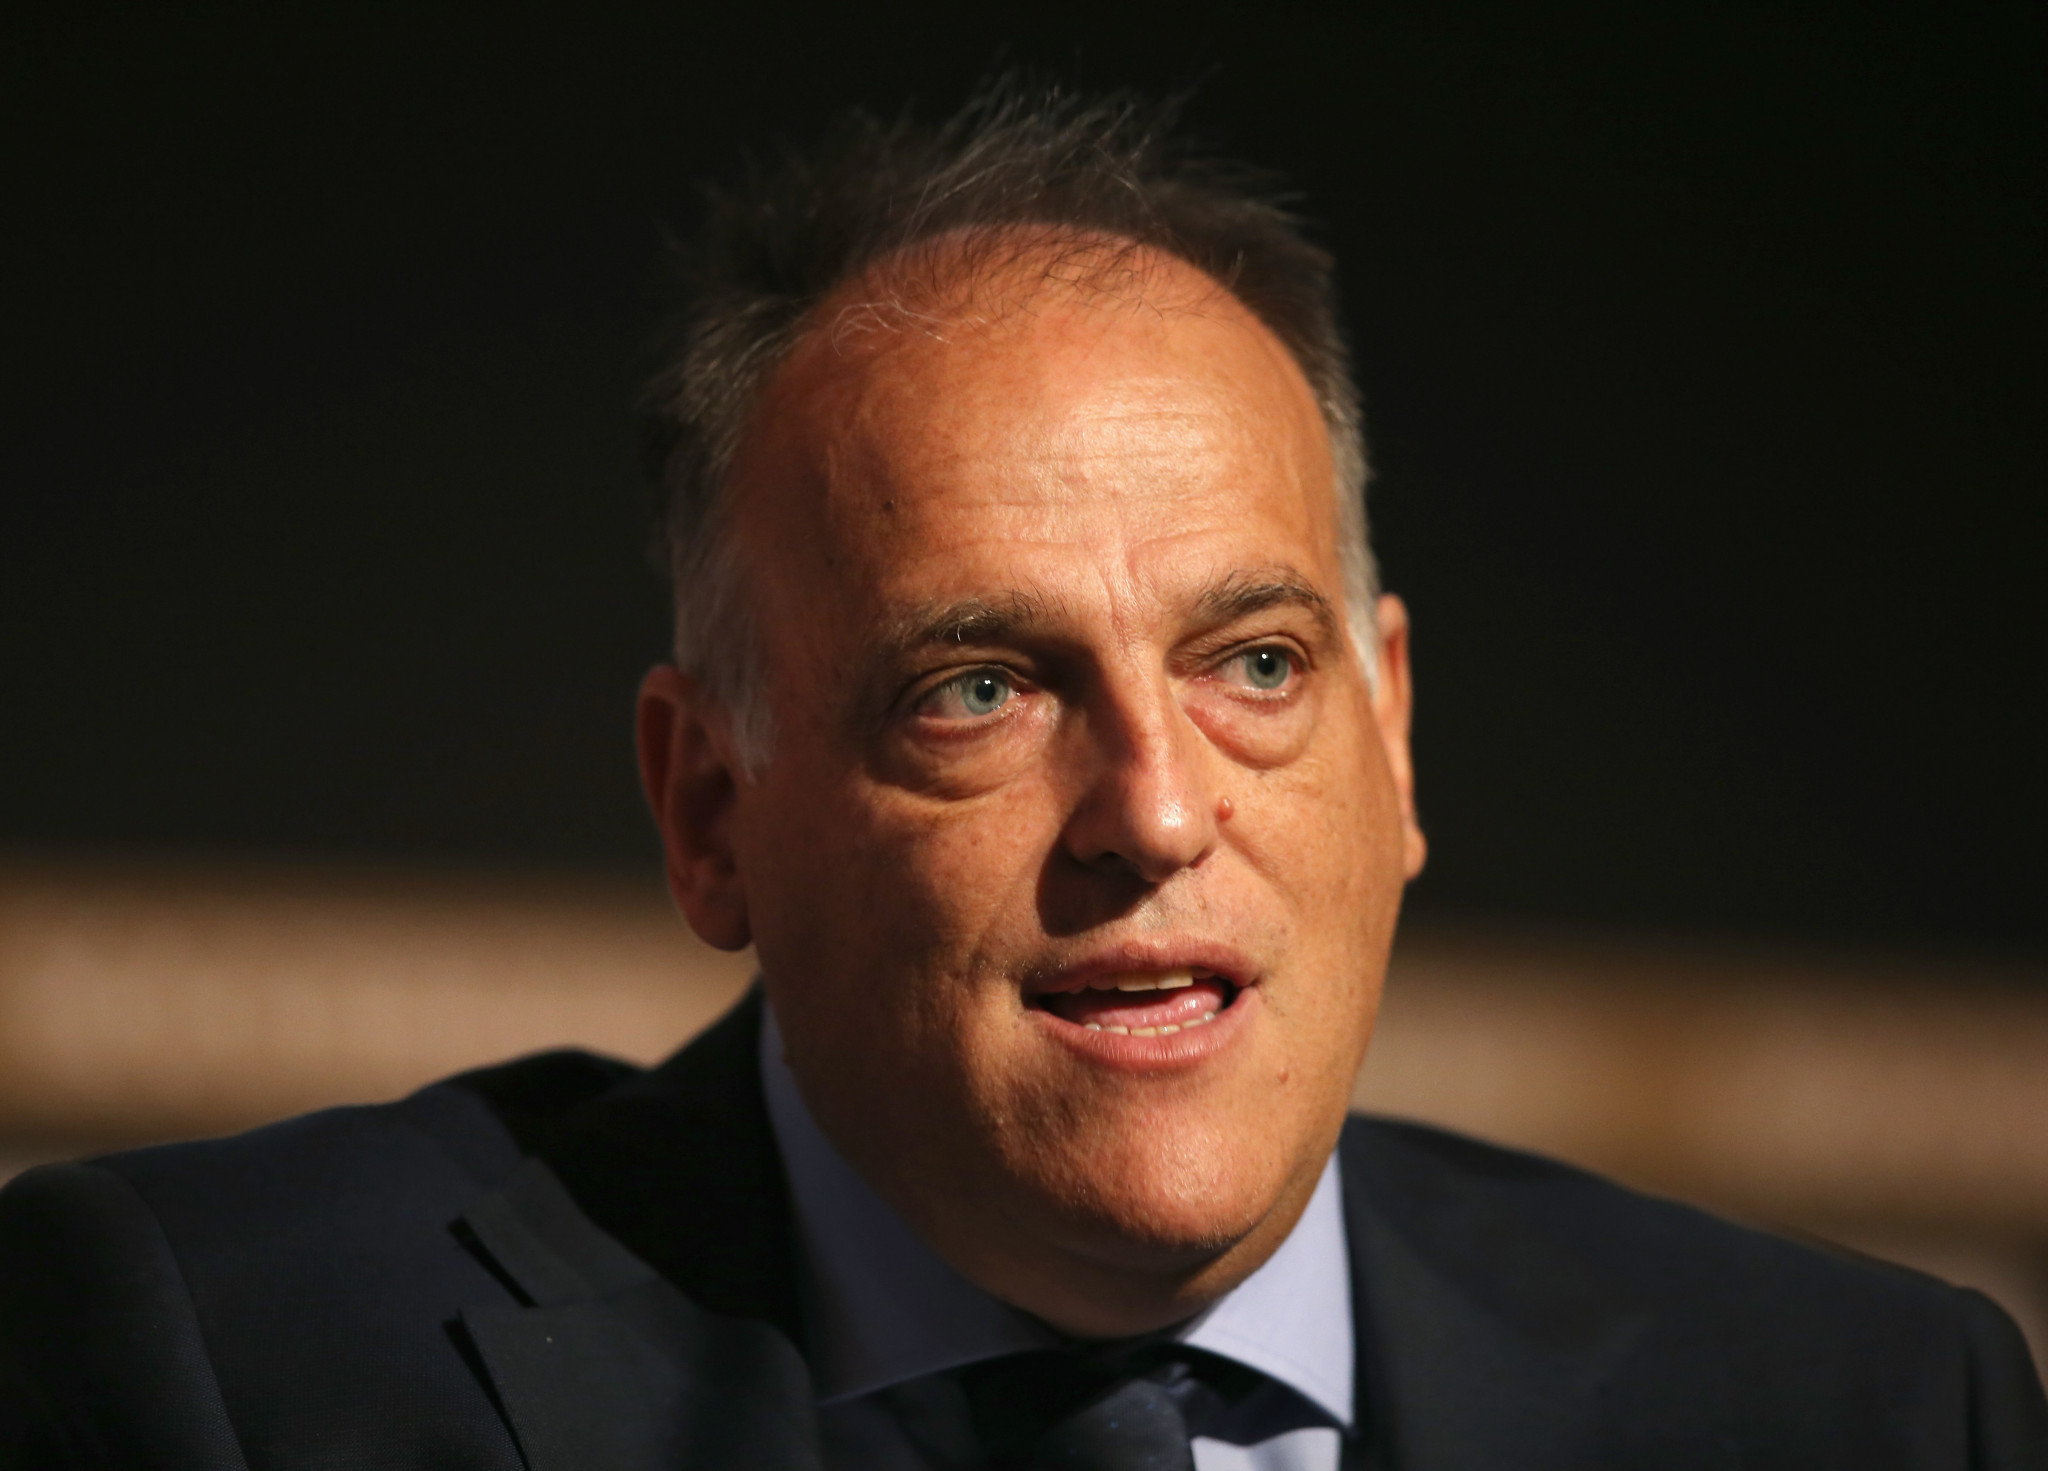 Javier Tebas, La Liga President, envisages investing in other Spanish sports federations ©Getty Images